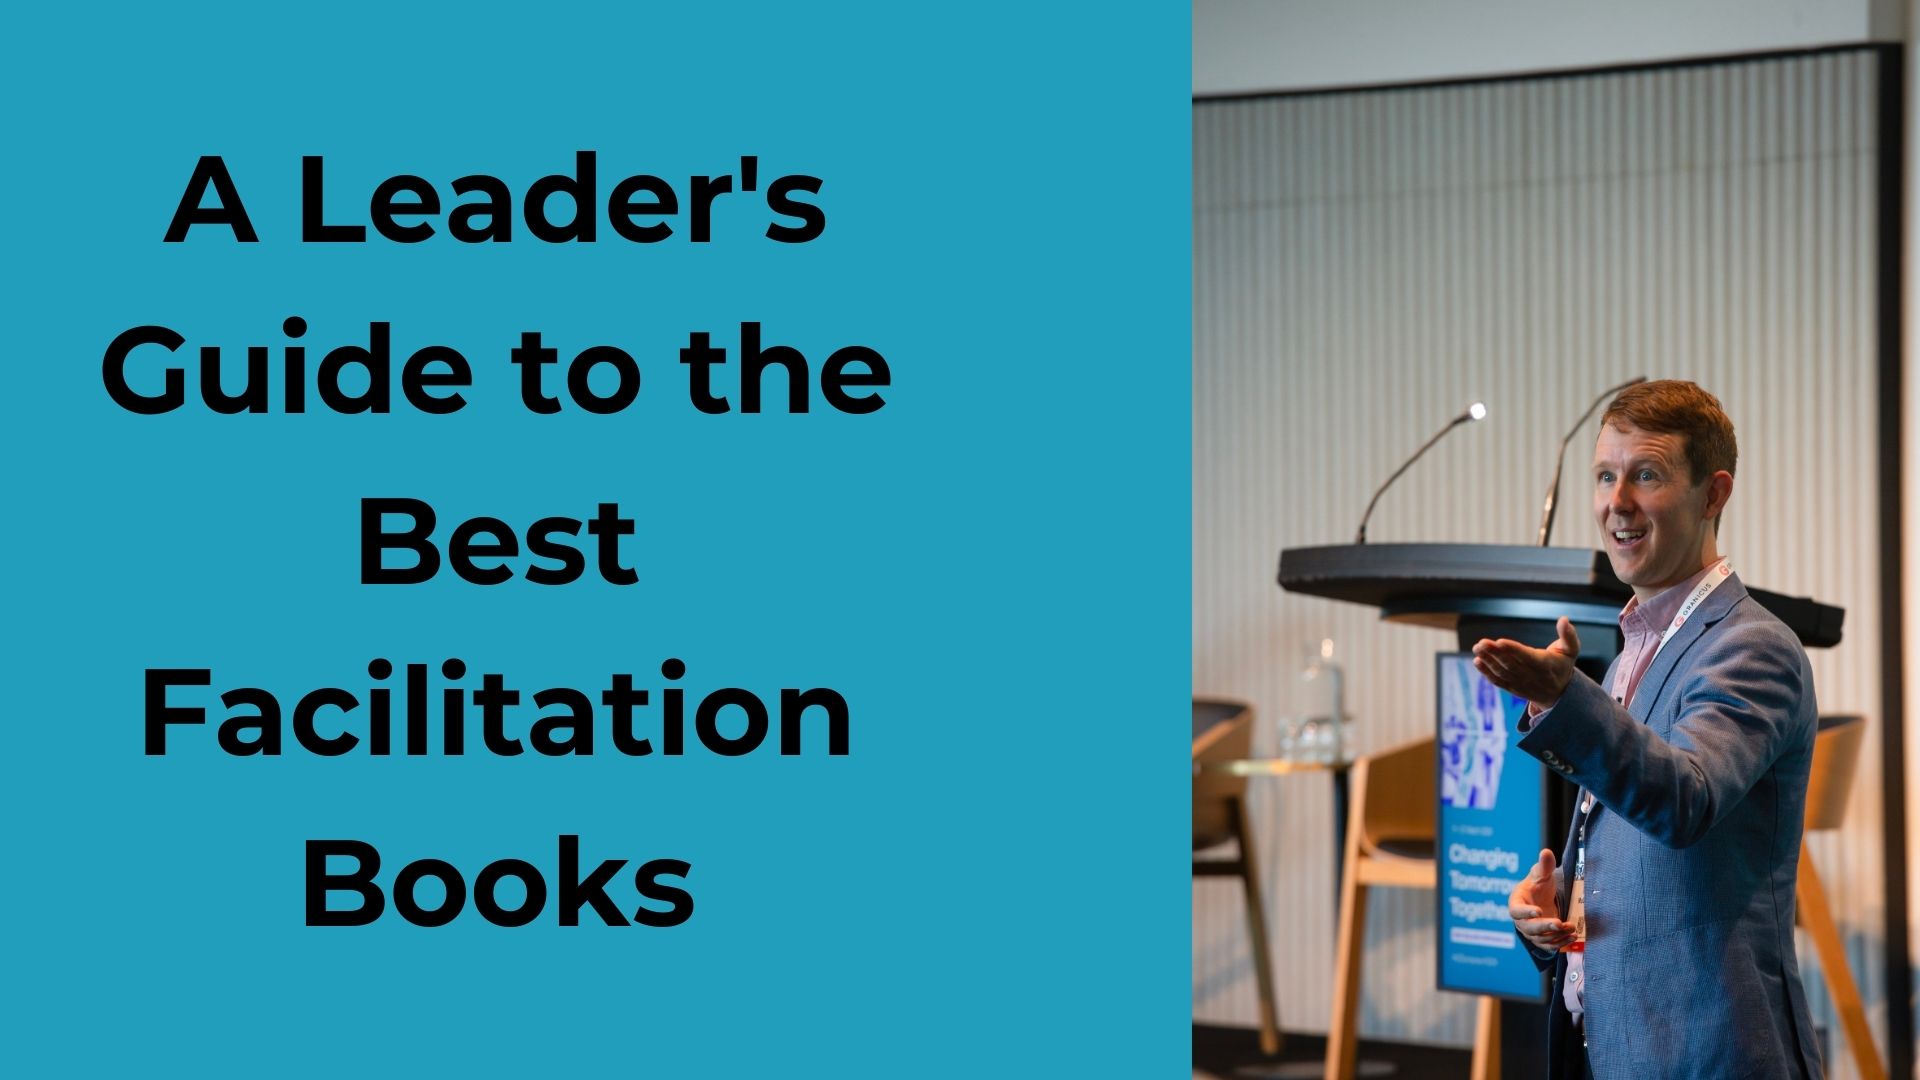 A Leader's Guide to the Best Facilitation Books